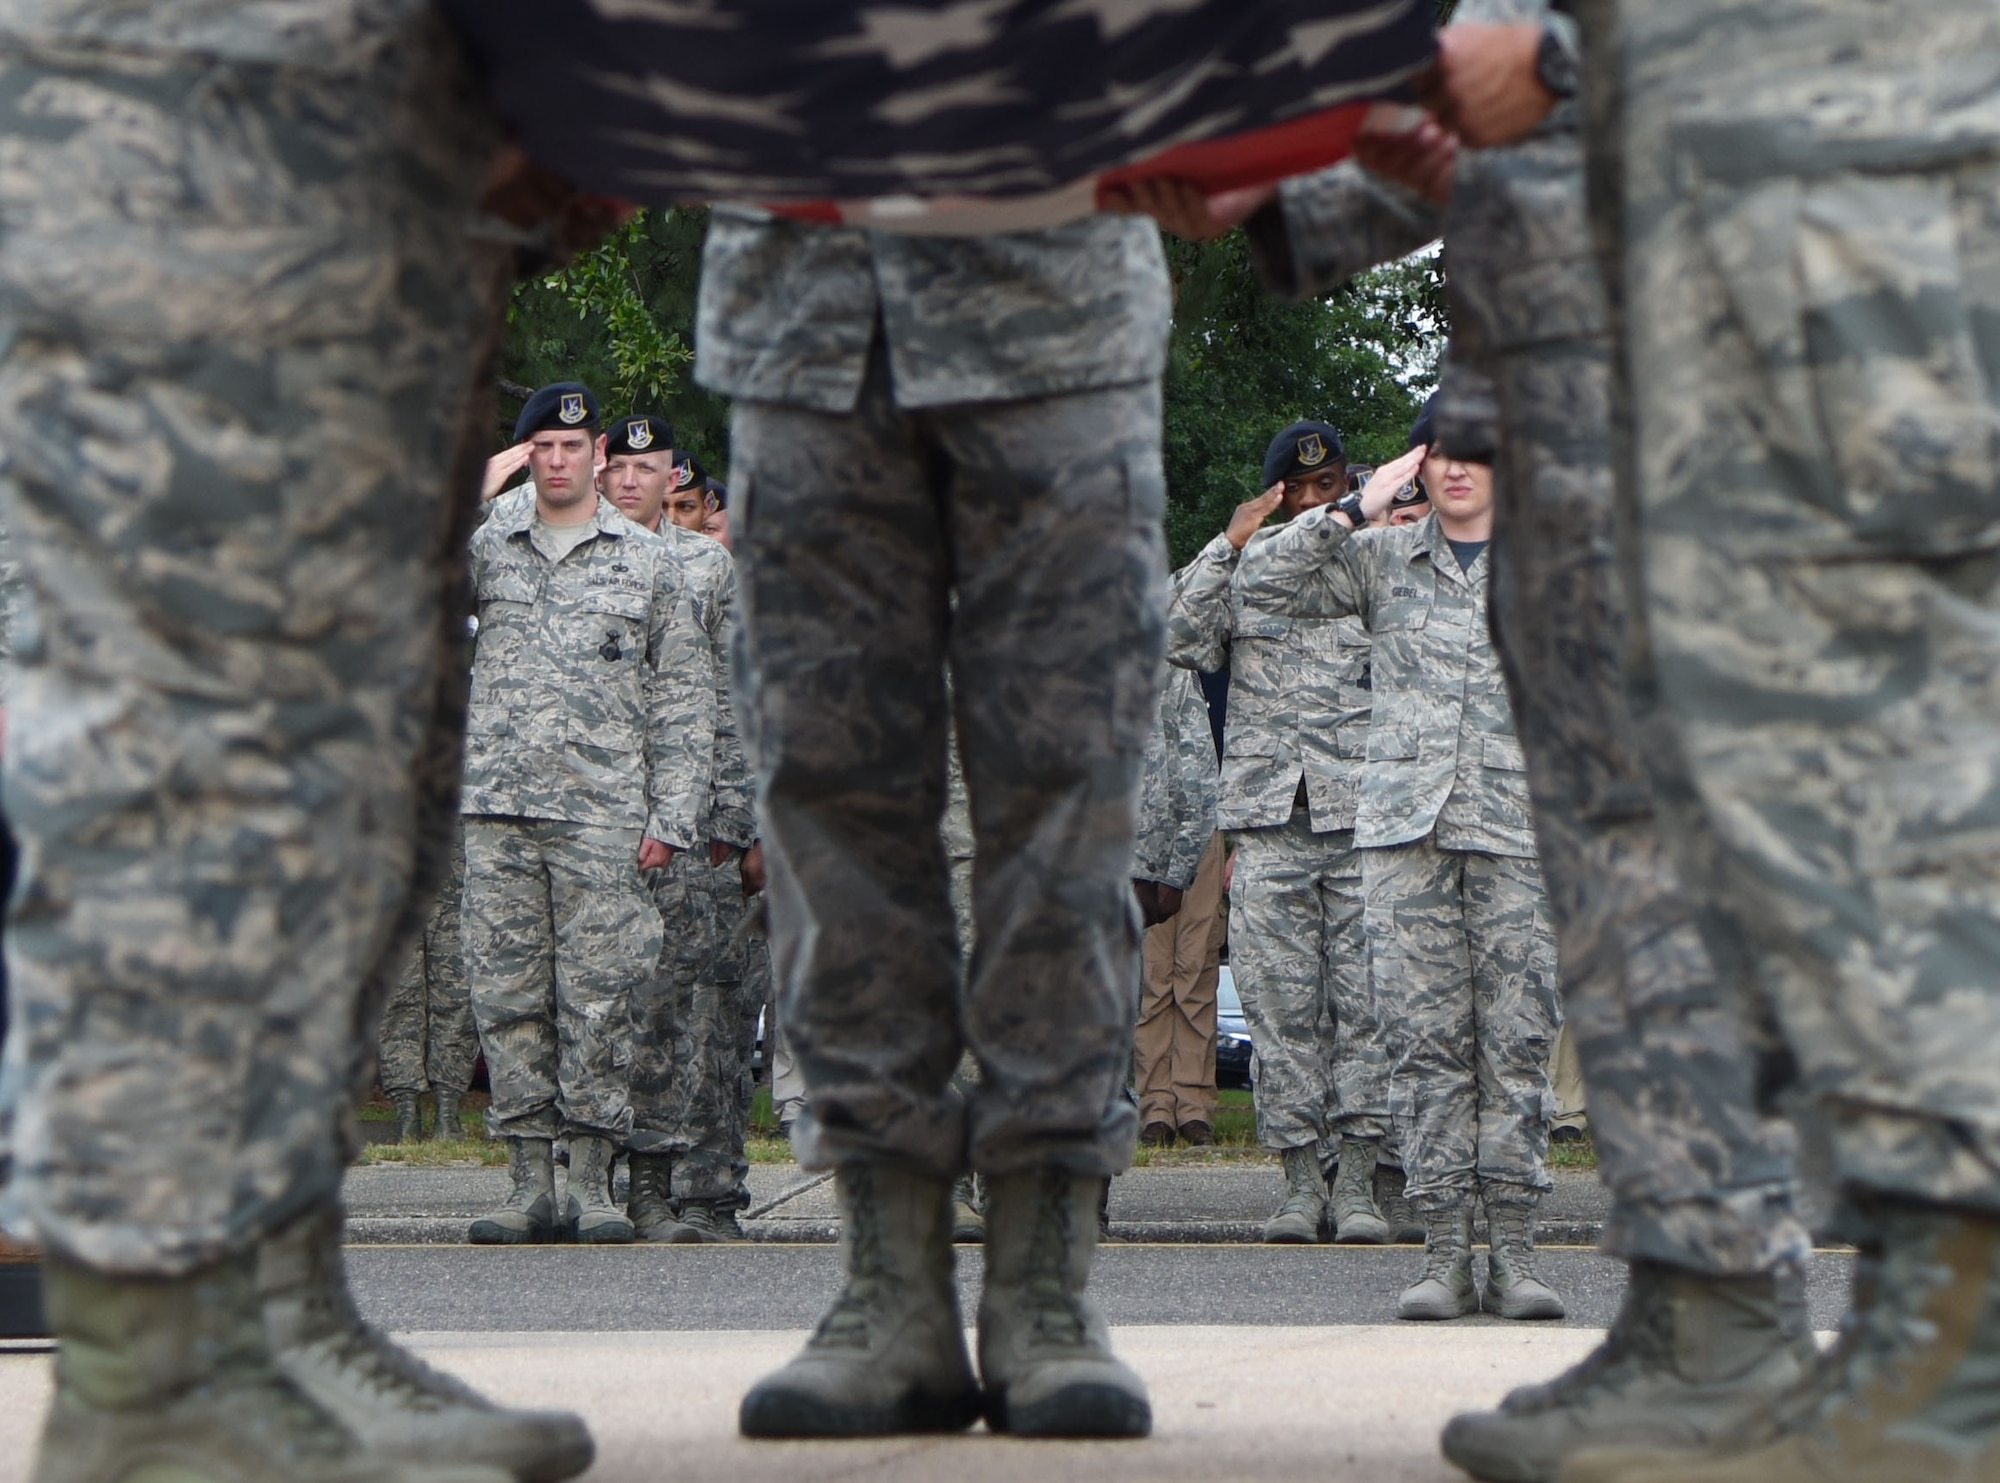 Members of the 81st Security Forces Squadron participate in the 81st SFS retreat ceremony at Keesler Air Force Base, Mississippi, May 18, 2018. The event was held during National Police Week, which recognizes the service of law enforcement men and women who put their lives at risk every day. (U.S. Air Force photo by Kemberly Groue)